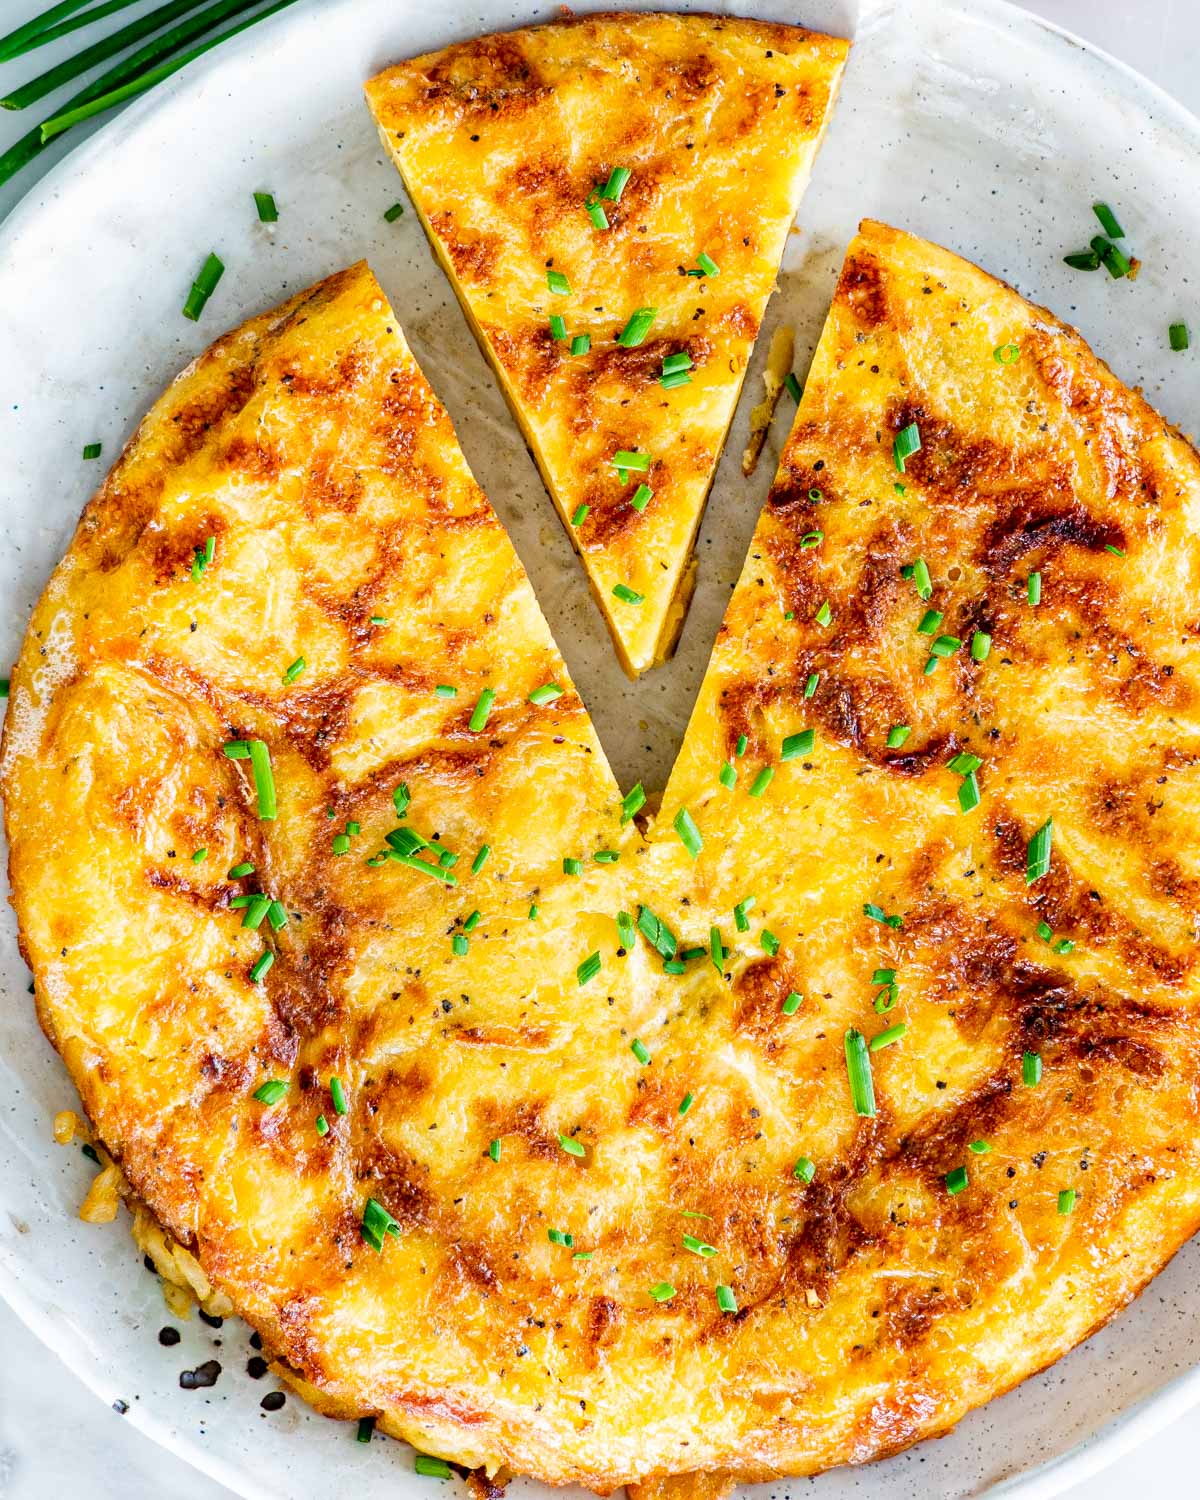 Overhead shot of Spanish tortilla on a plate with one slice cut out and garnished with chives